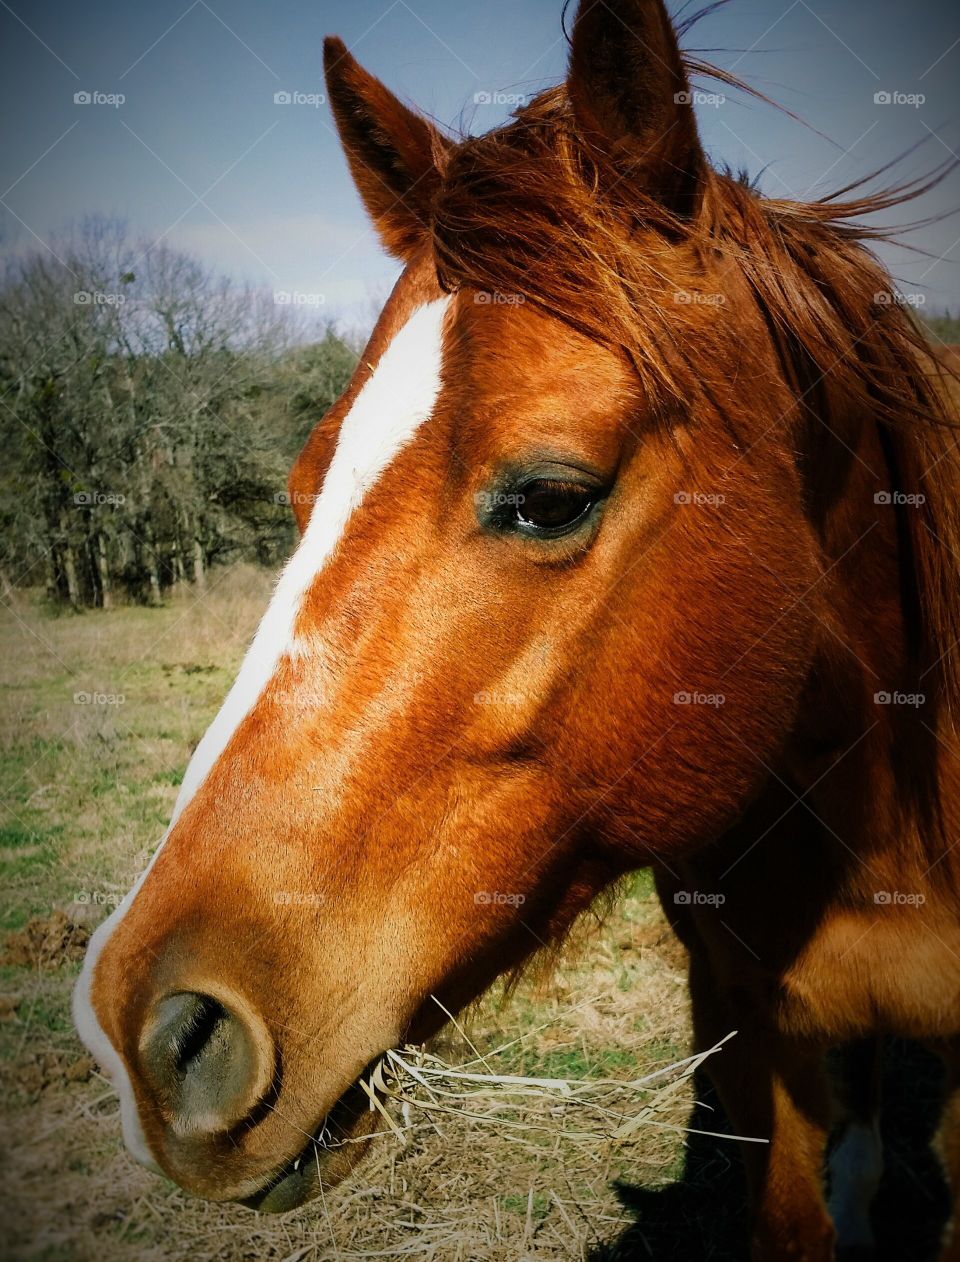 Close-up of horse eating grass